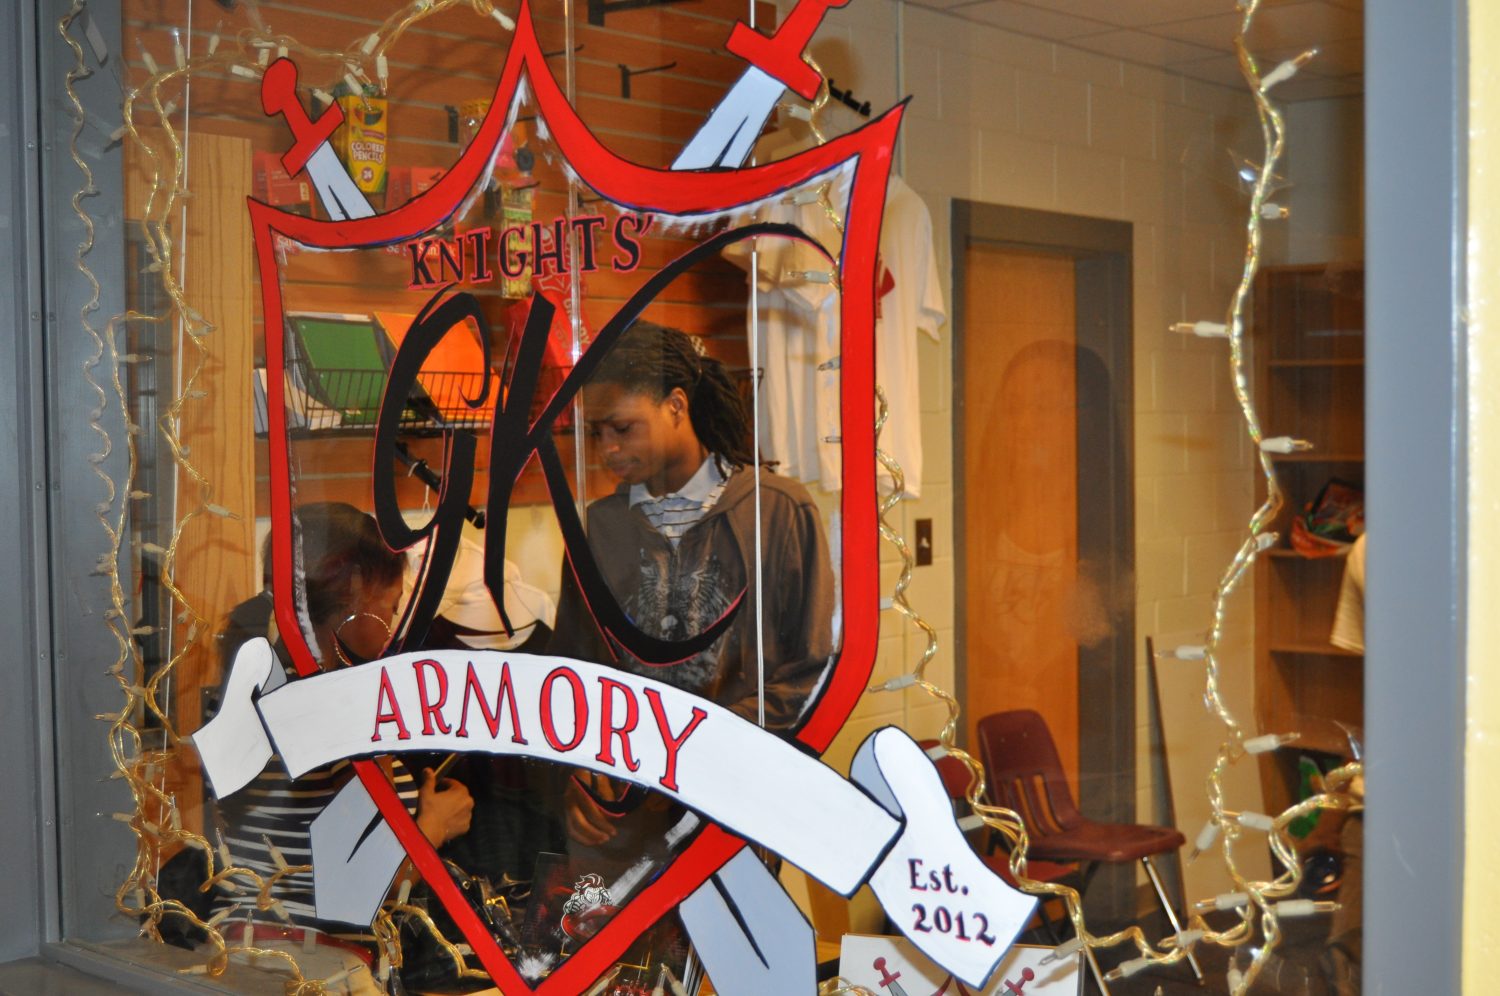 The Grady Armory, opened on January 13, sells school supplies, clothes and snacks before and after school.